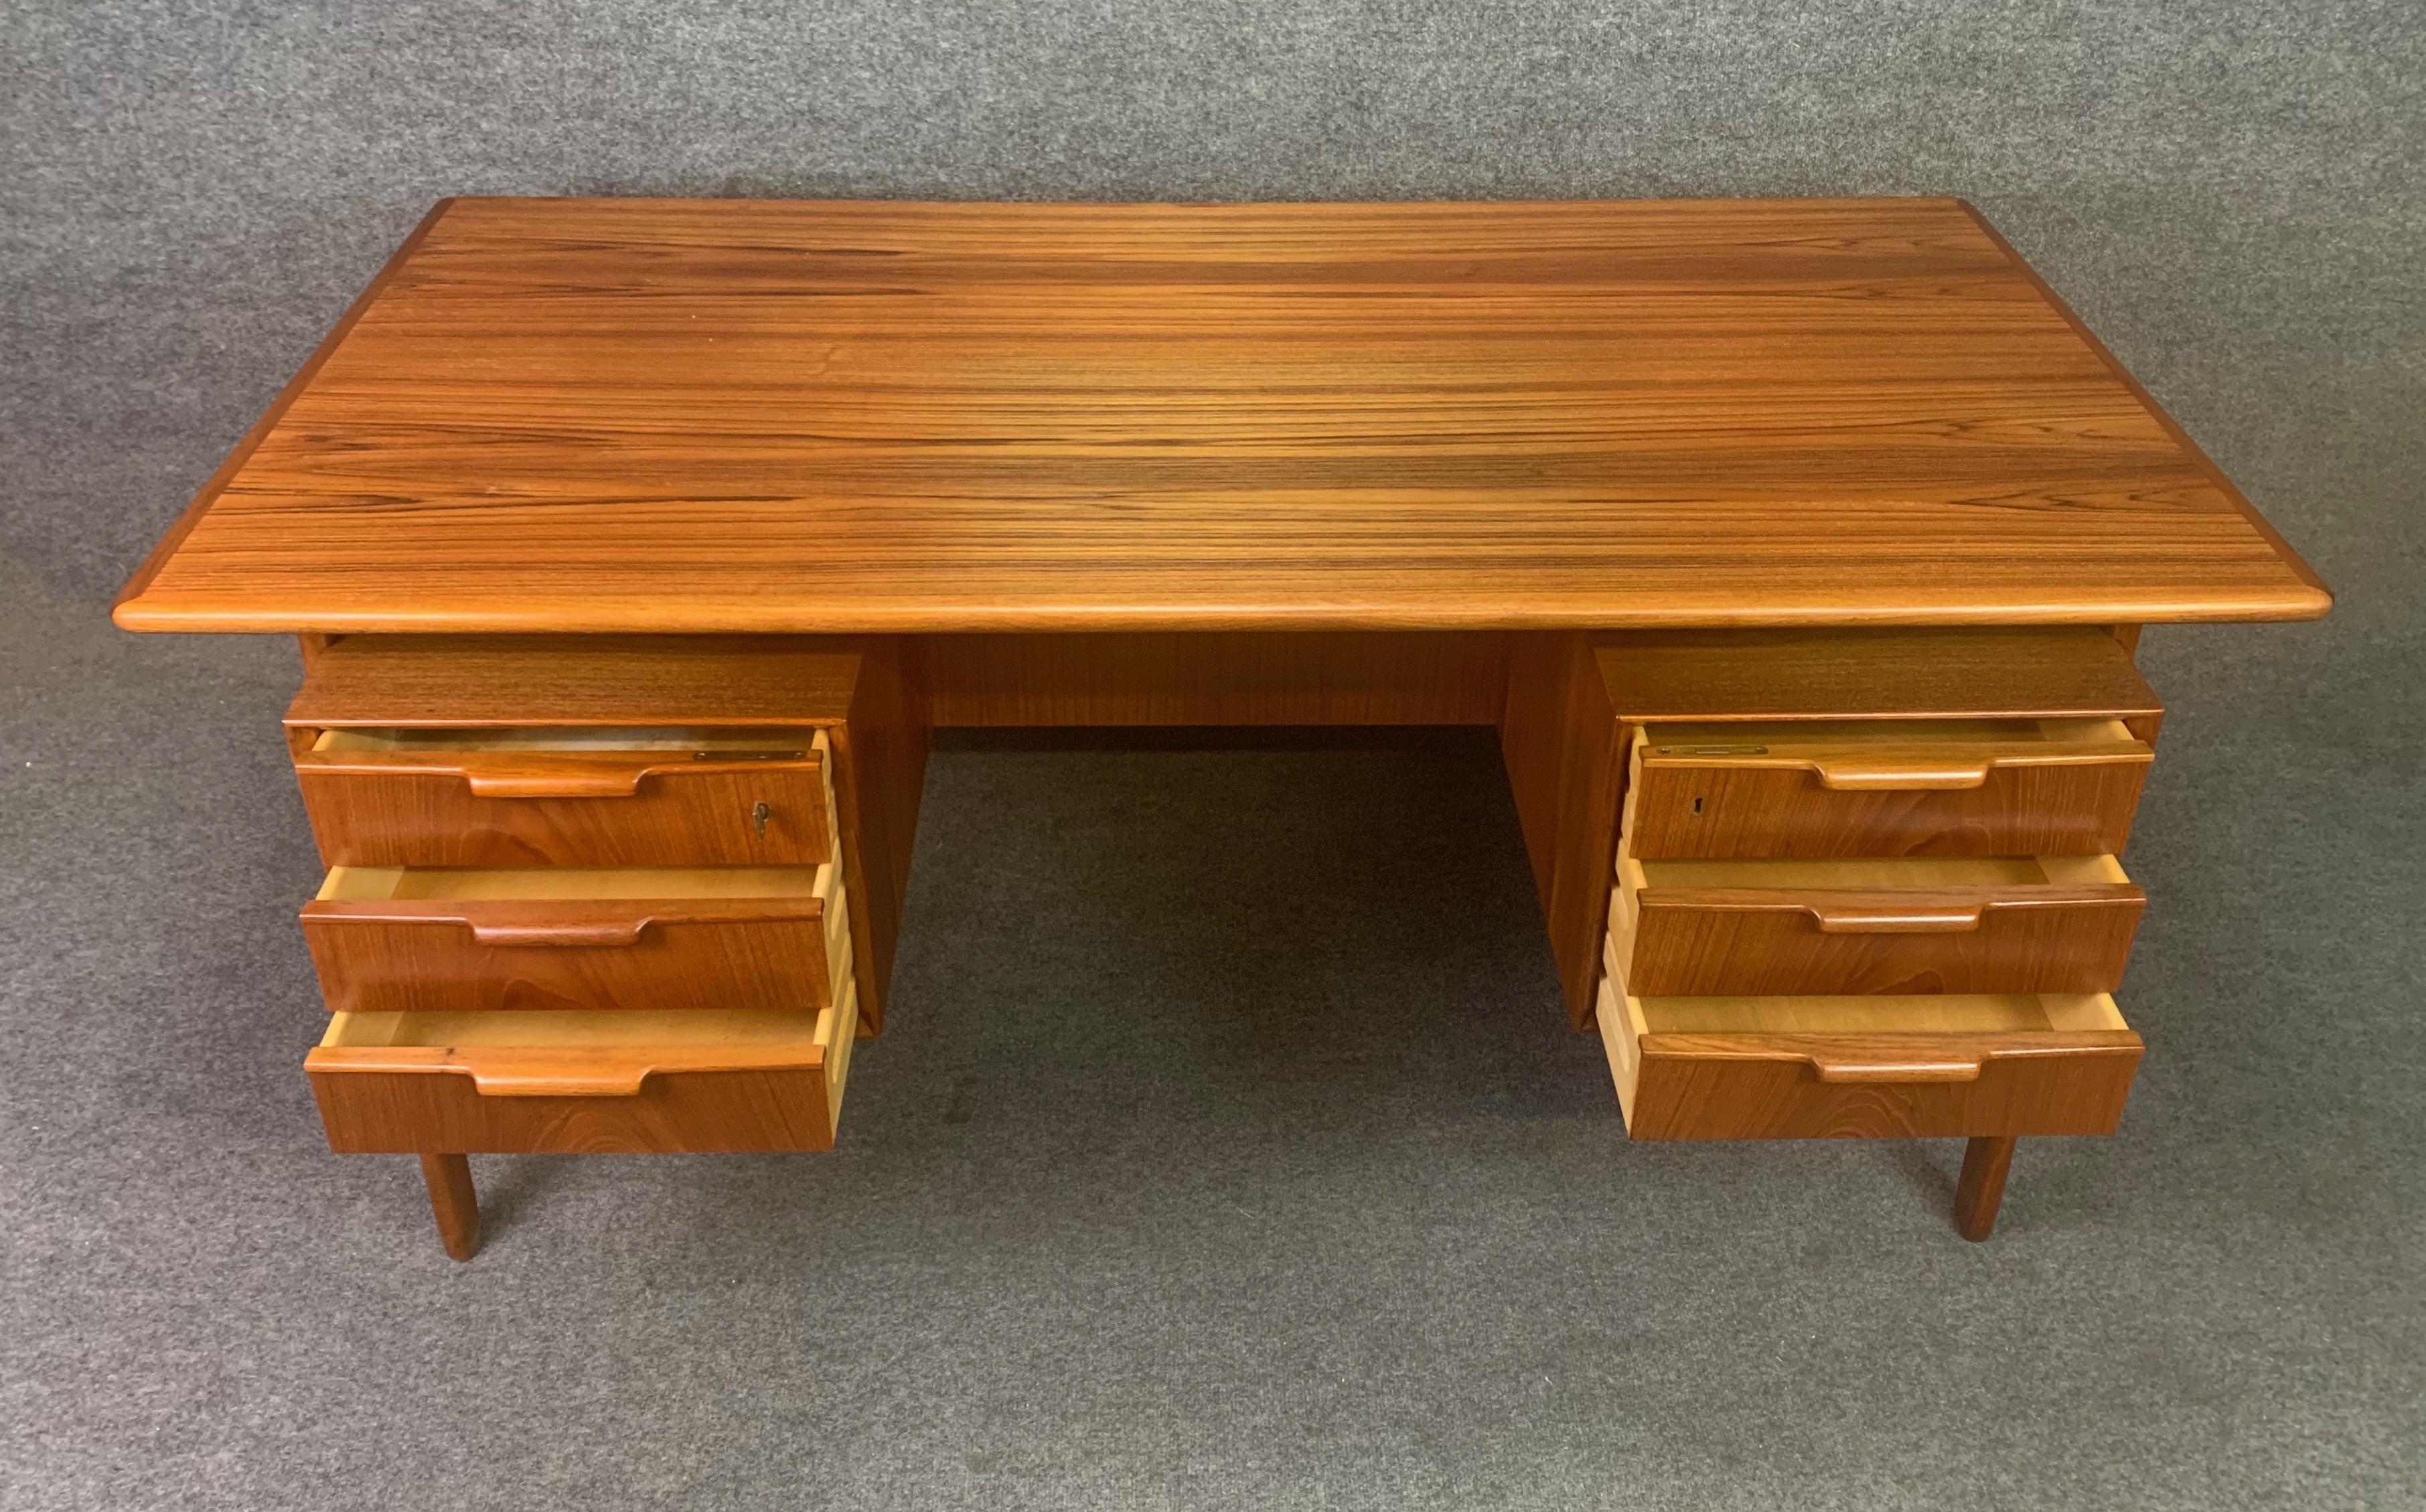 Here is the iconic Model 75 desk in teak designed by Gunni Omann and manufactured by Omann Jun Mobelfabrik which was recently imported from Denmark to California before its restoration. This stunning 1960s Scandinavian Modern teak desk features a